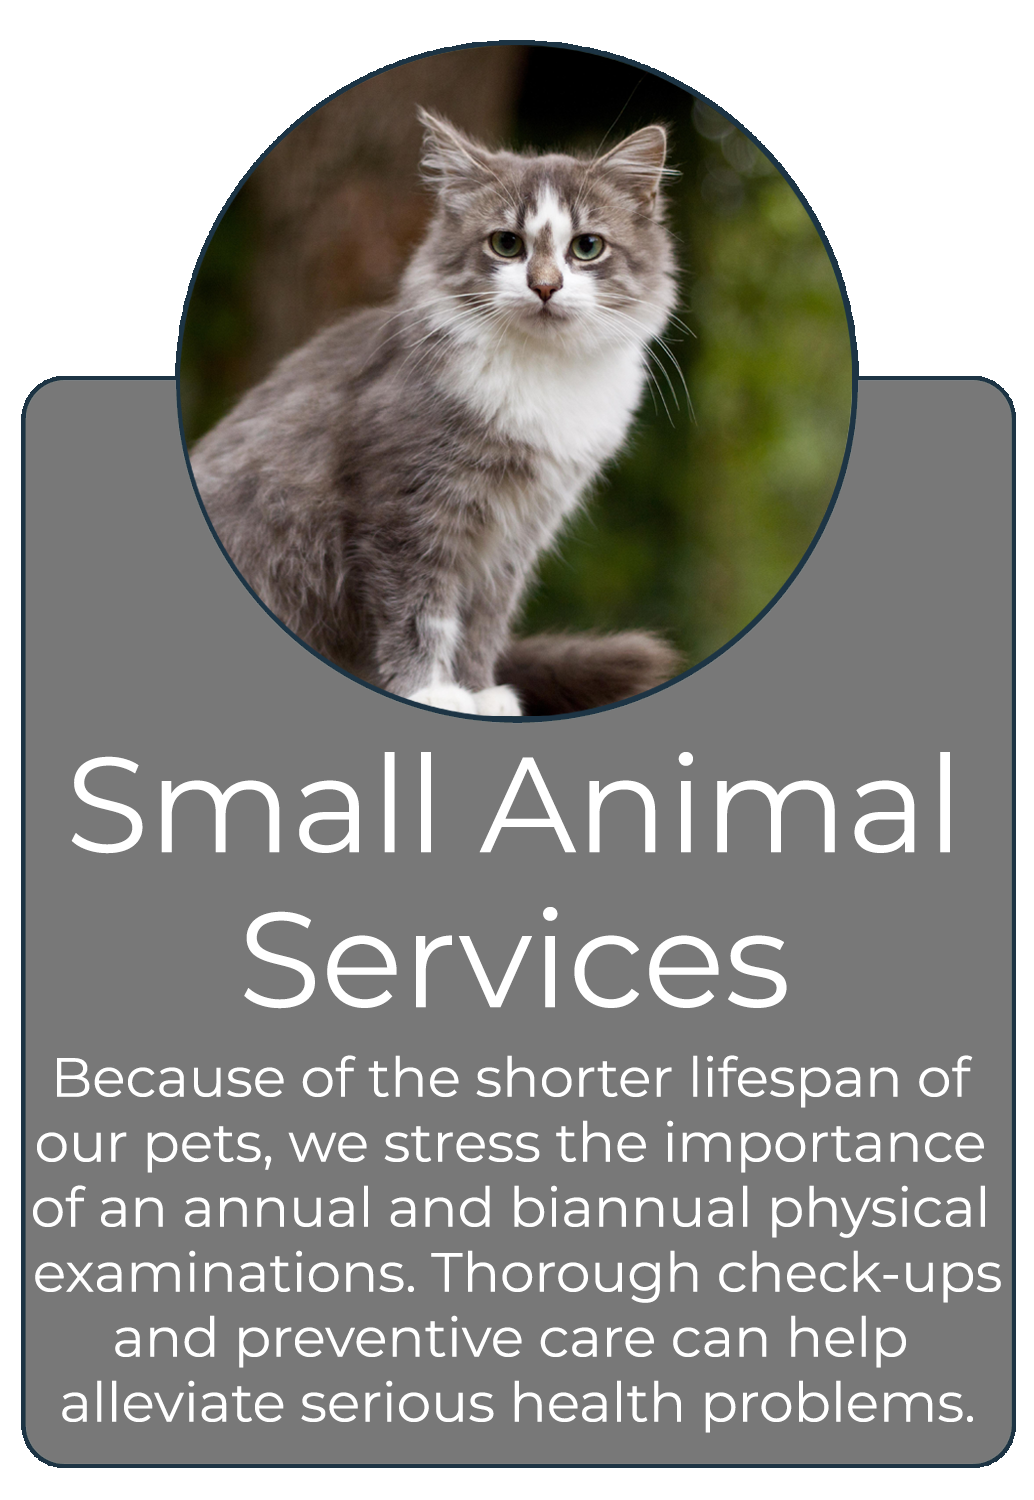 Small Animal Services - Click to read about our services